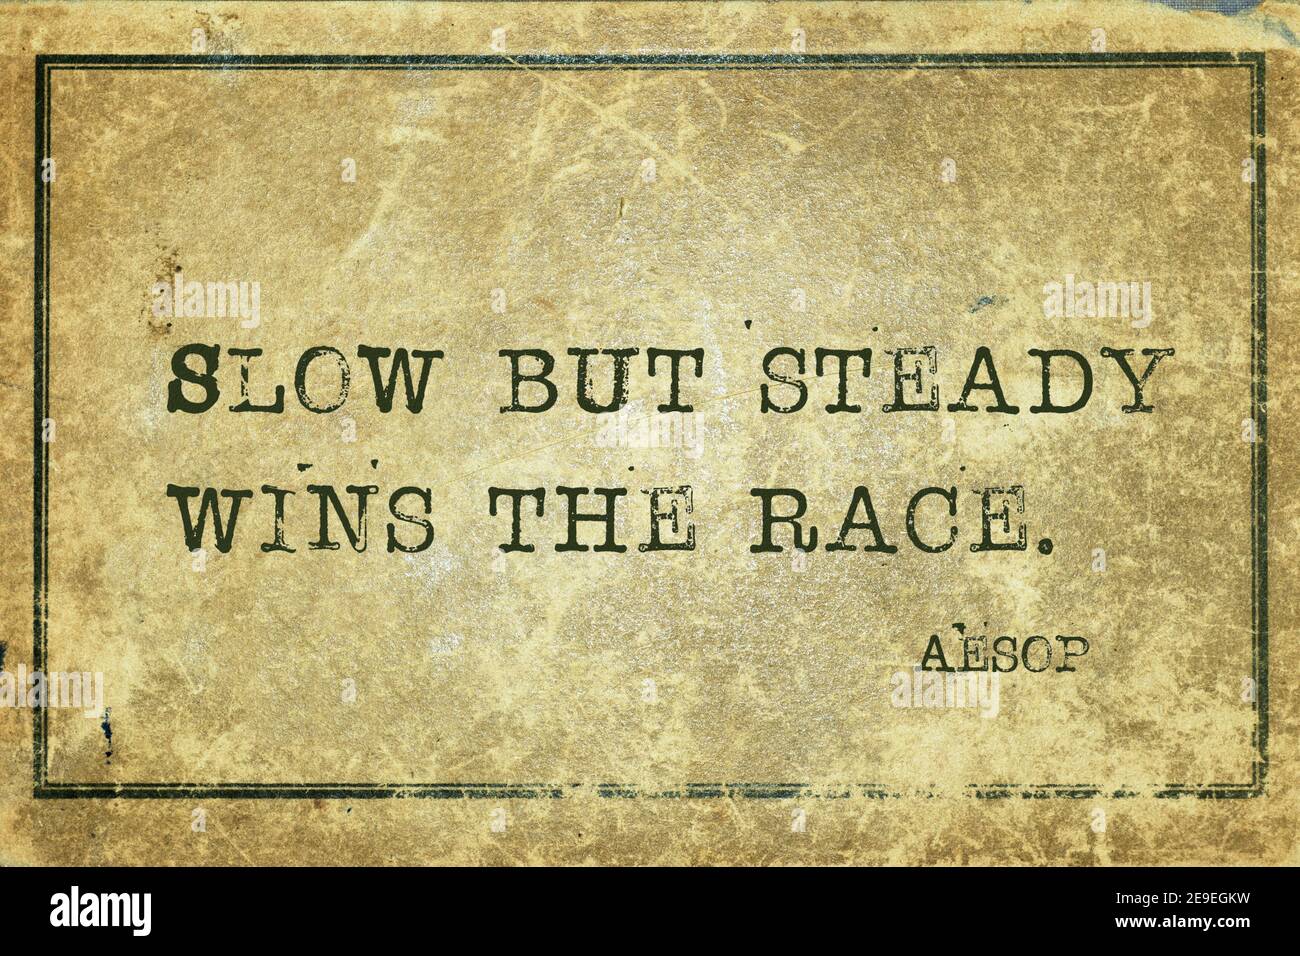 slow and steady wins the race quote